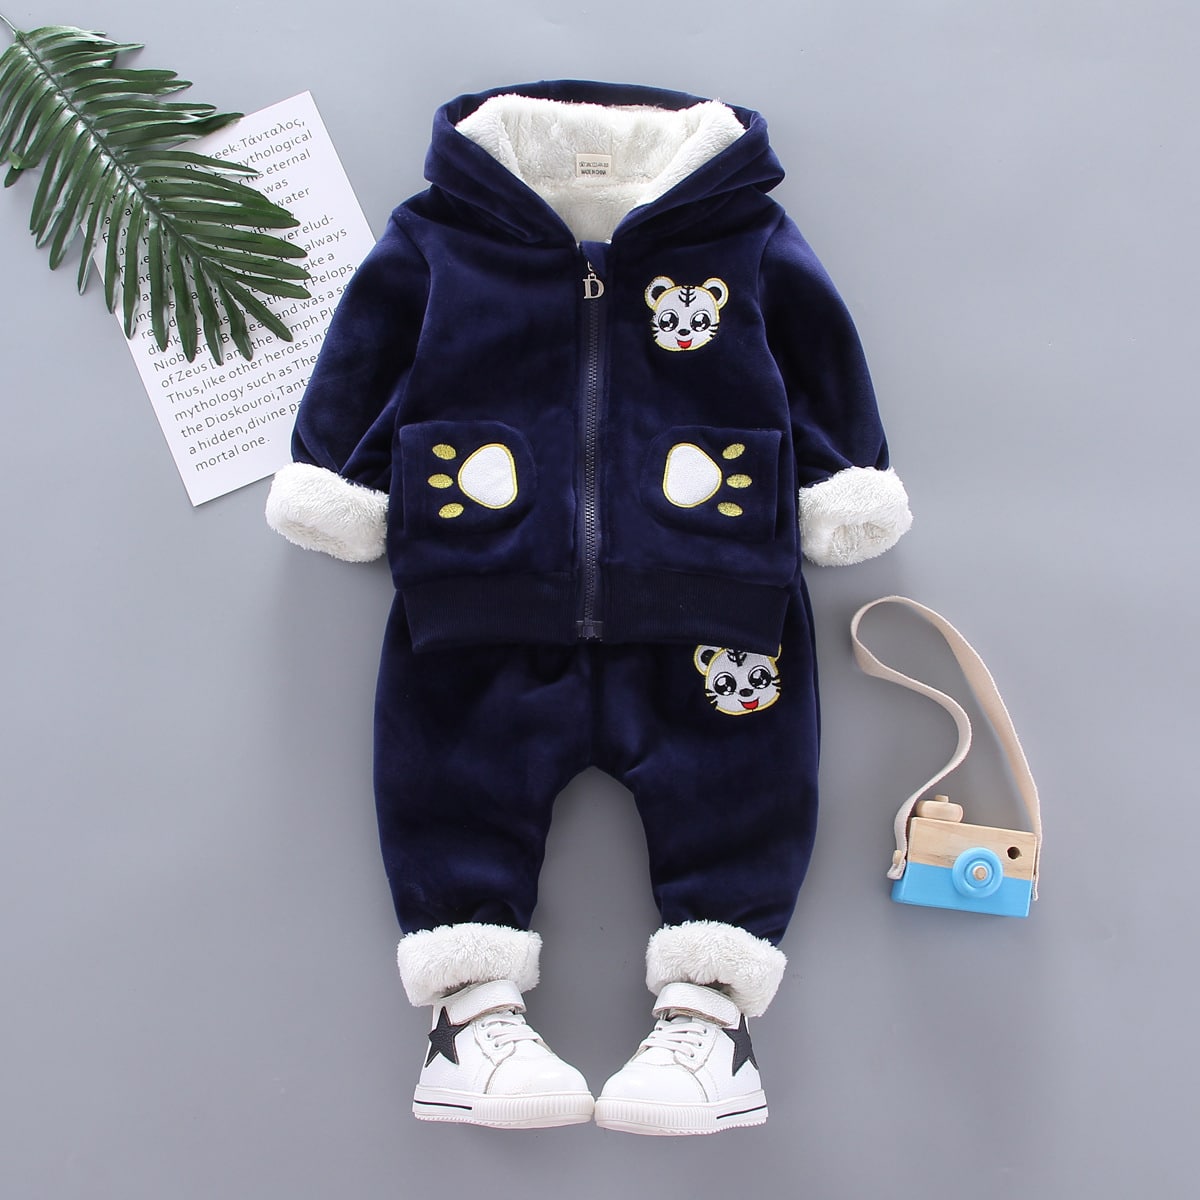 The New Children's clothing sports suit 5